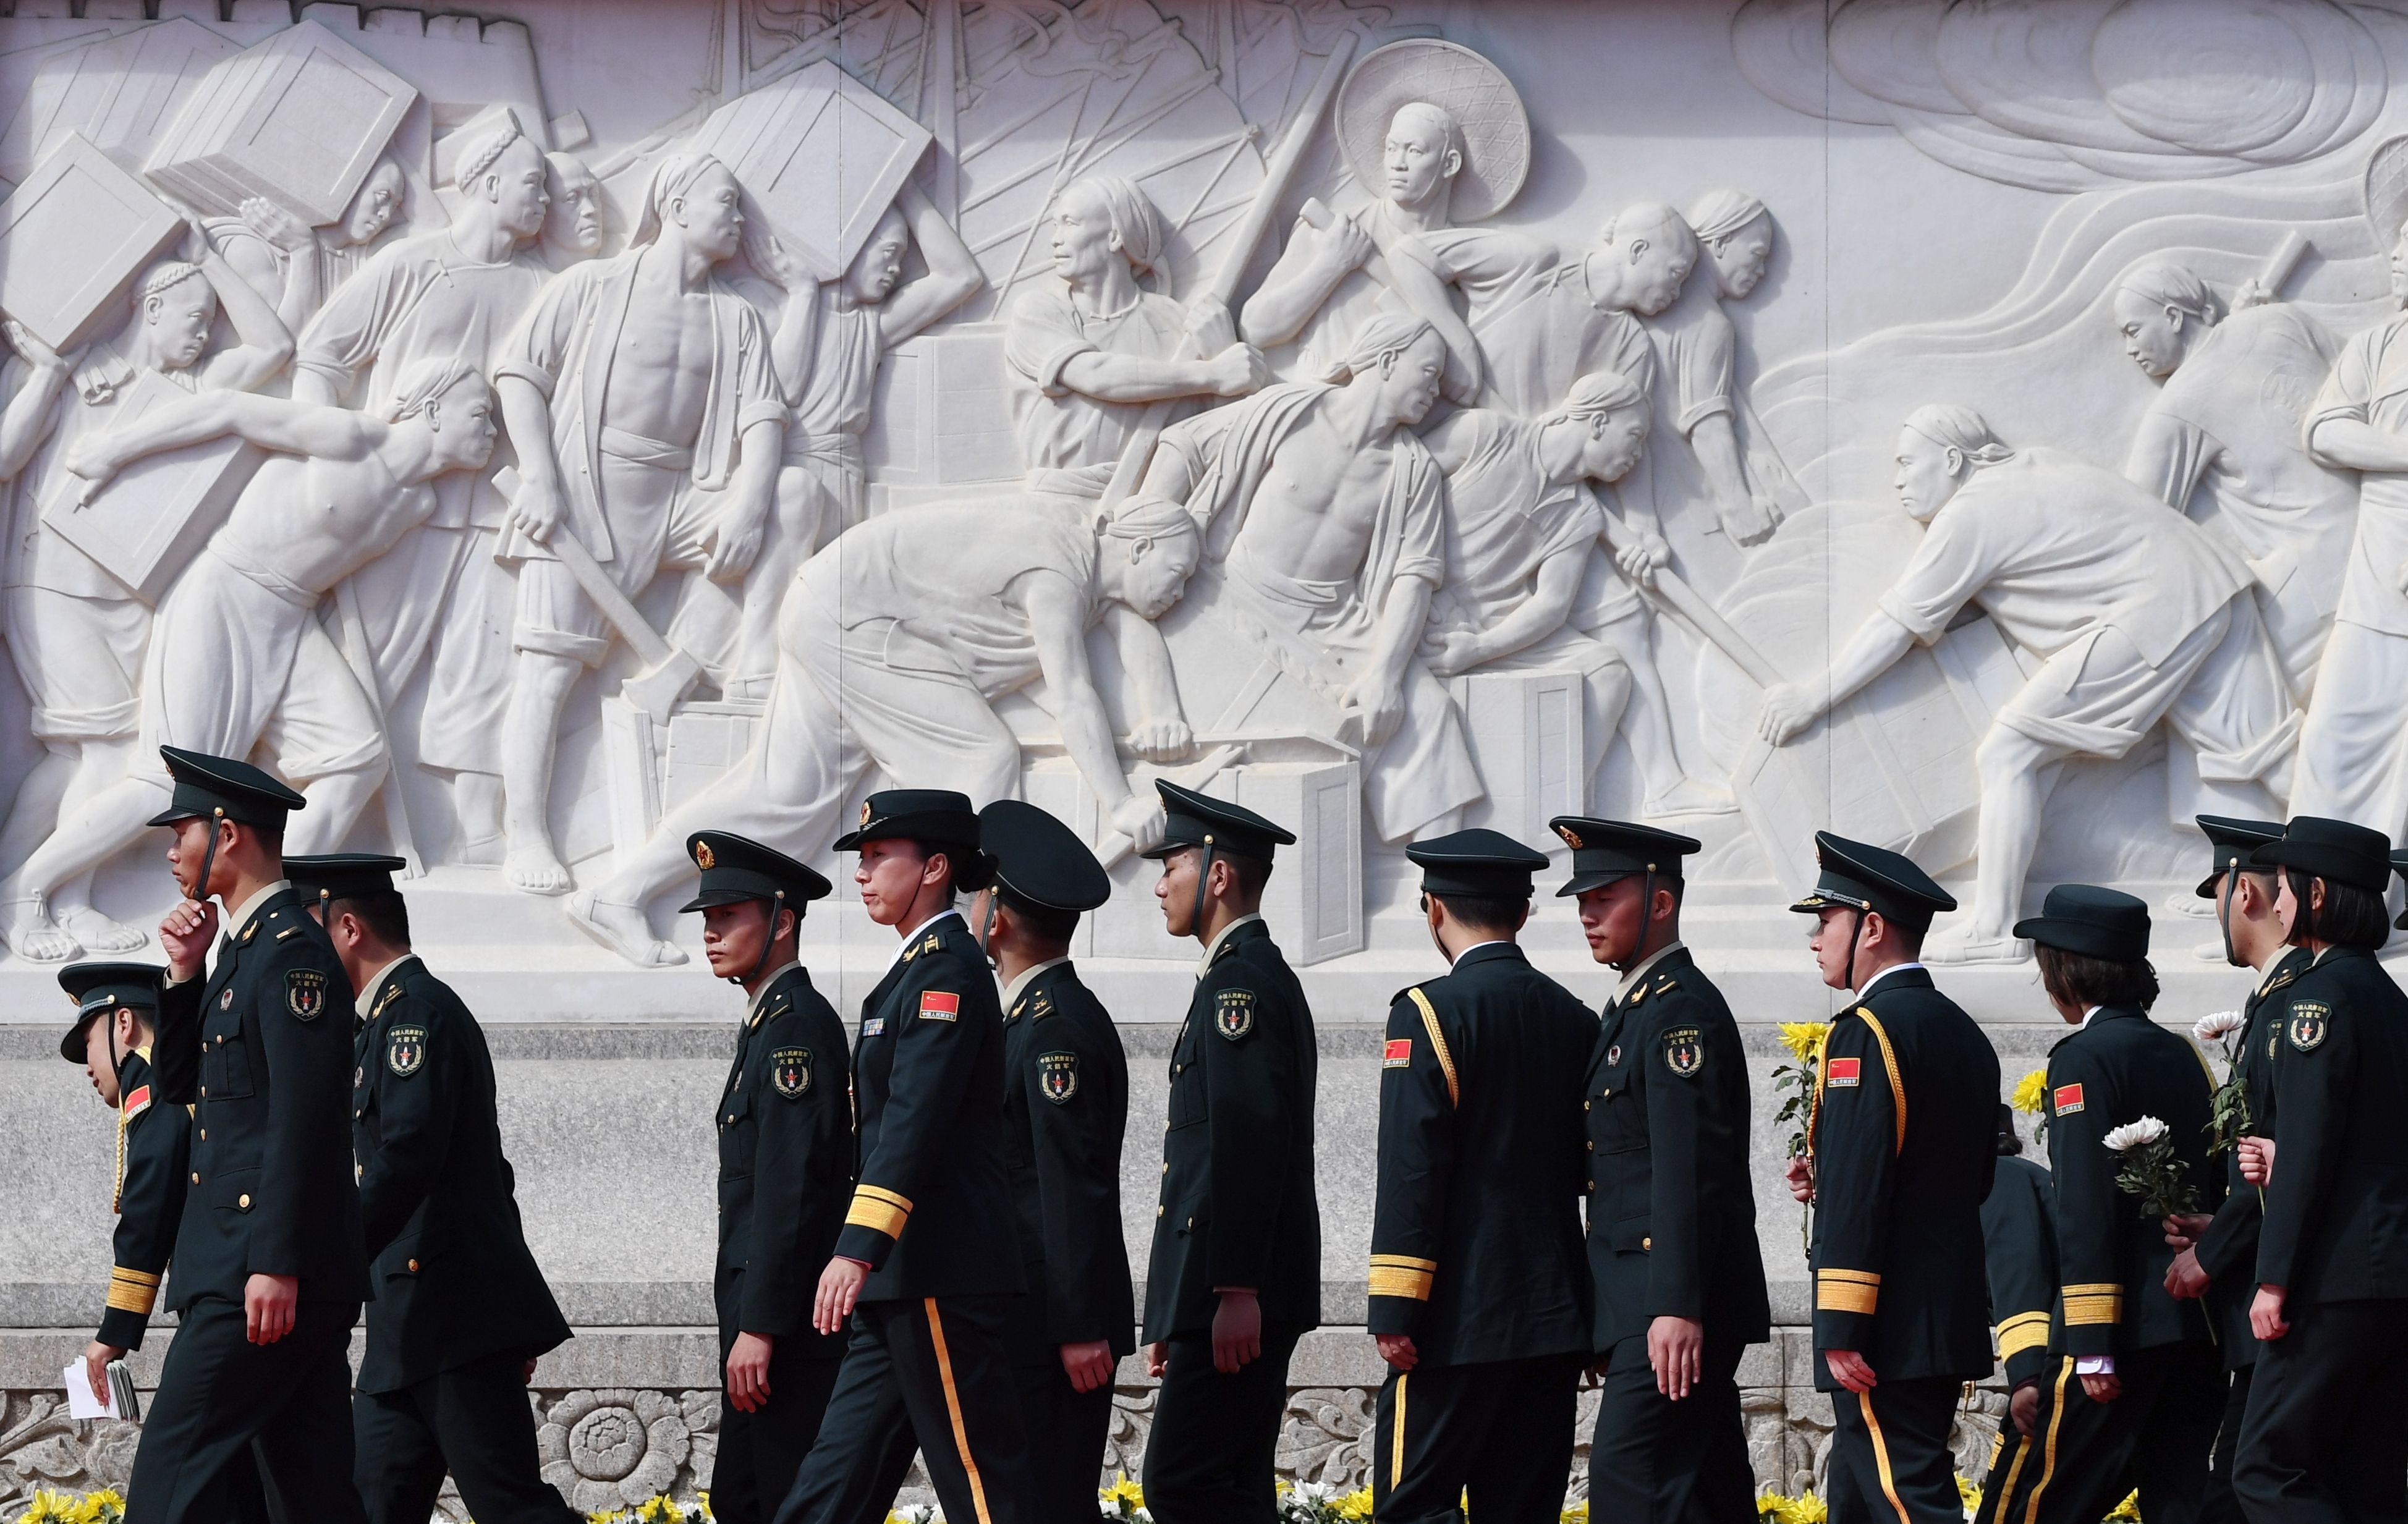 Chinese soldiers walk past the Monument to the People's Heroes during a ceremony in Beijing's Tiananmen Square, on the eve of National Day on Sept. 30, 2018. China marks its National Day, the 69th anniversary of the founding of the People's Republic 